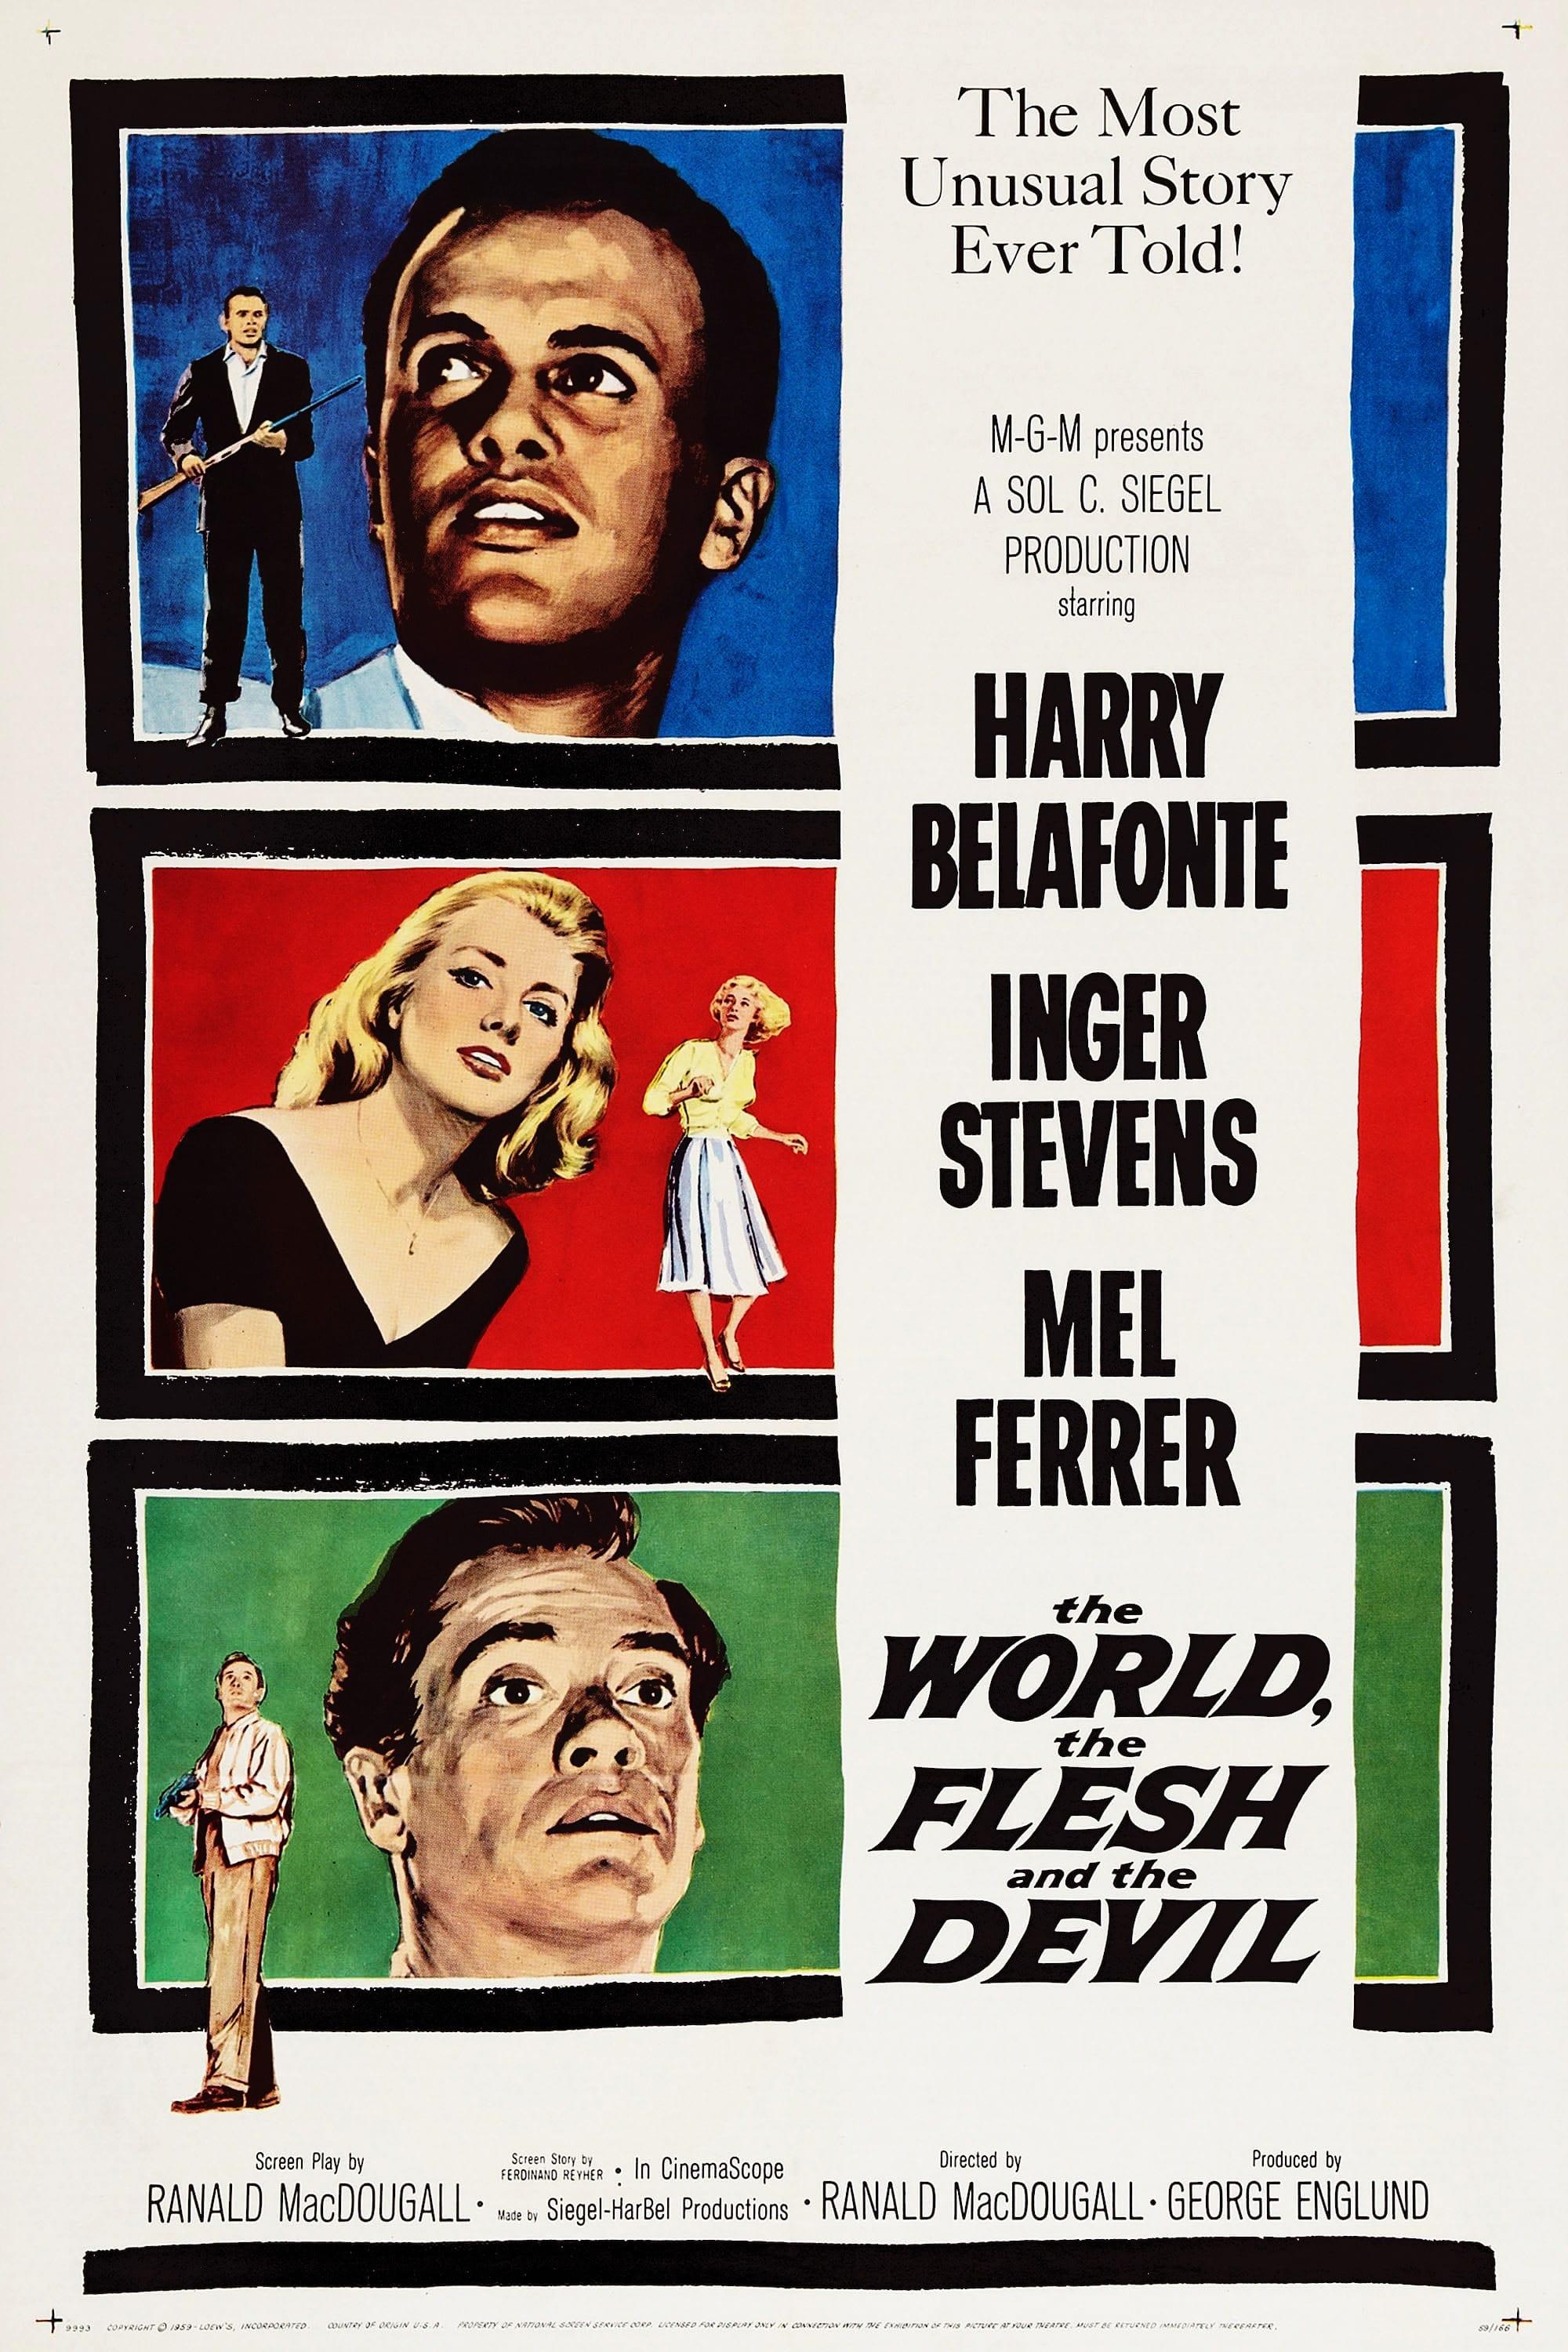 The World, the Flesh and the Devil poster